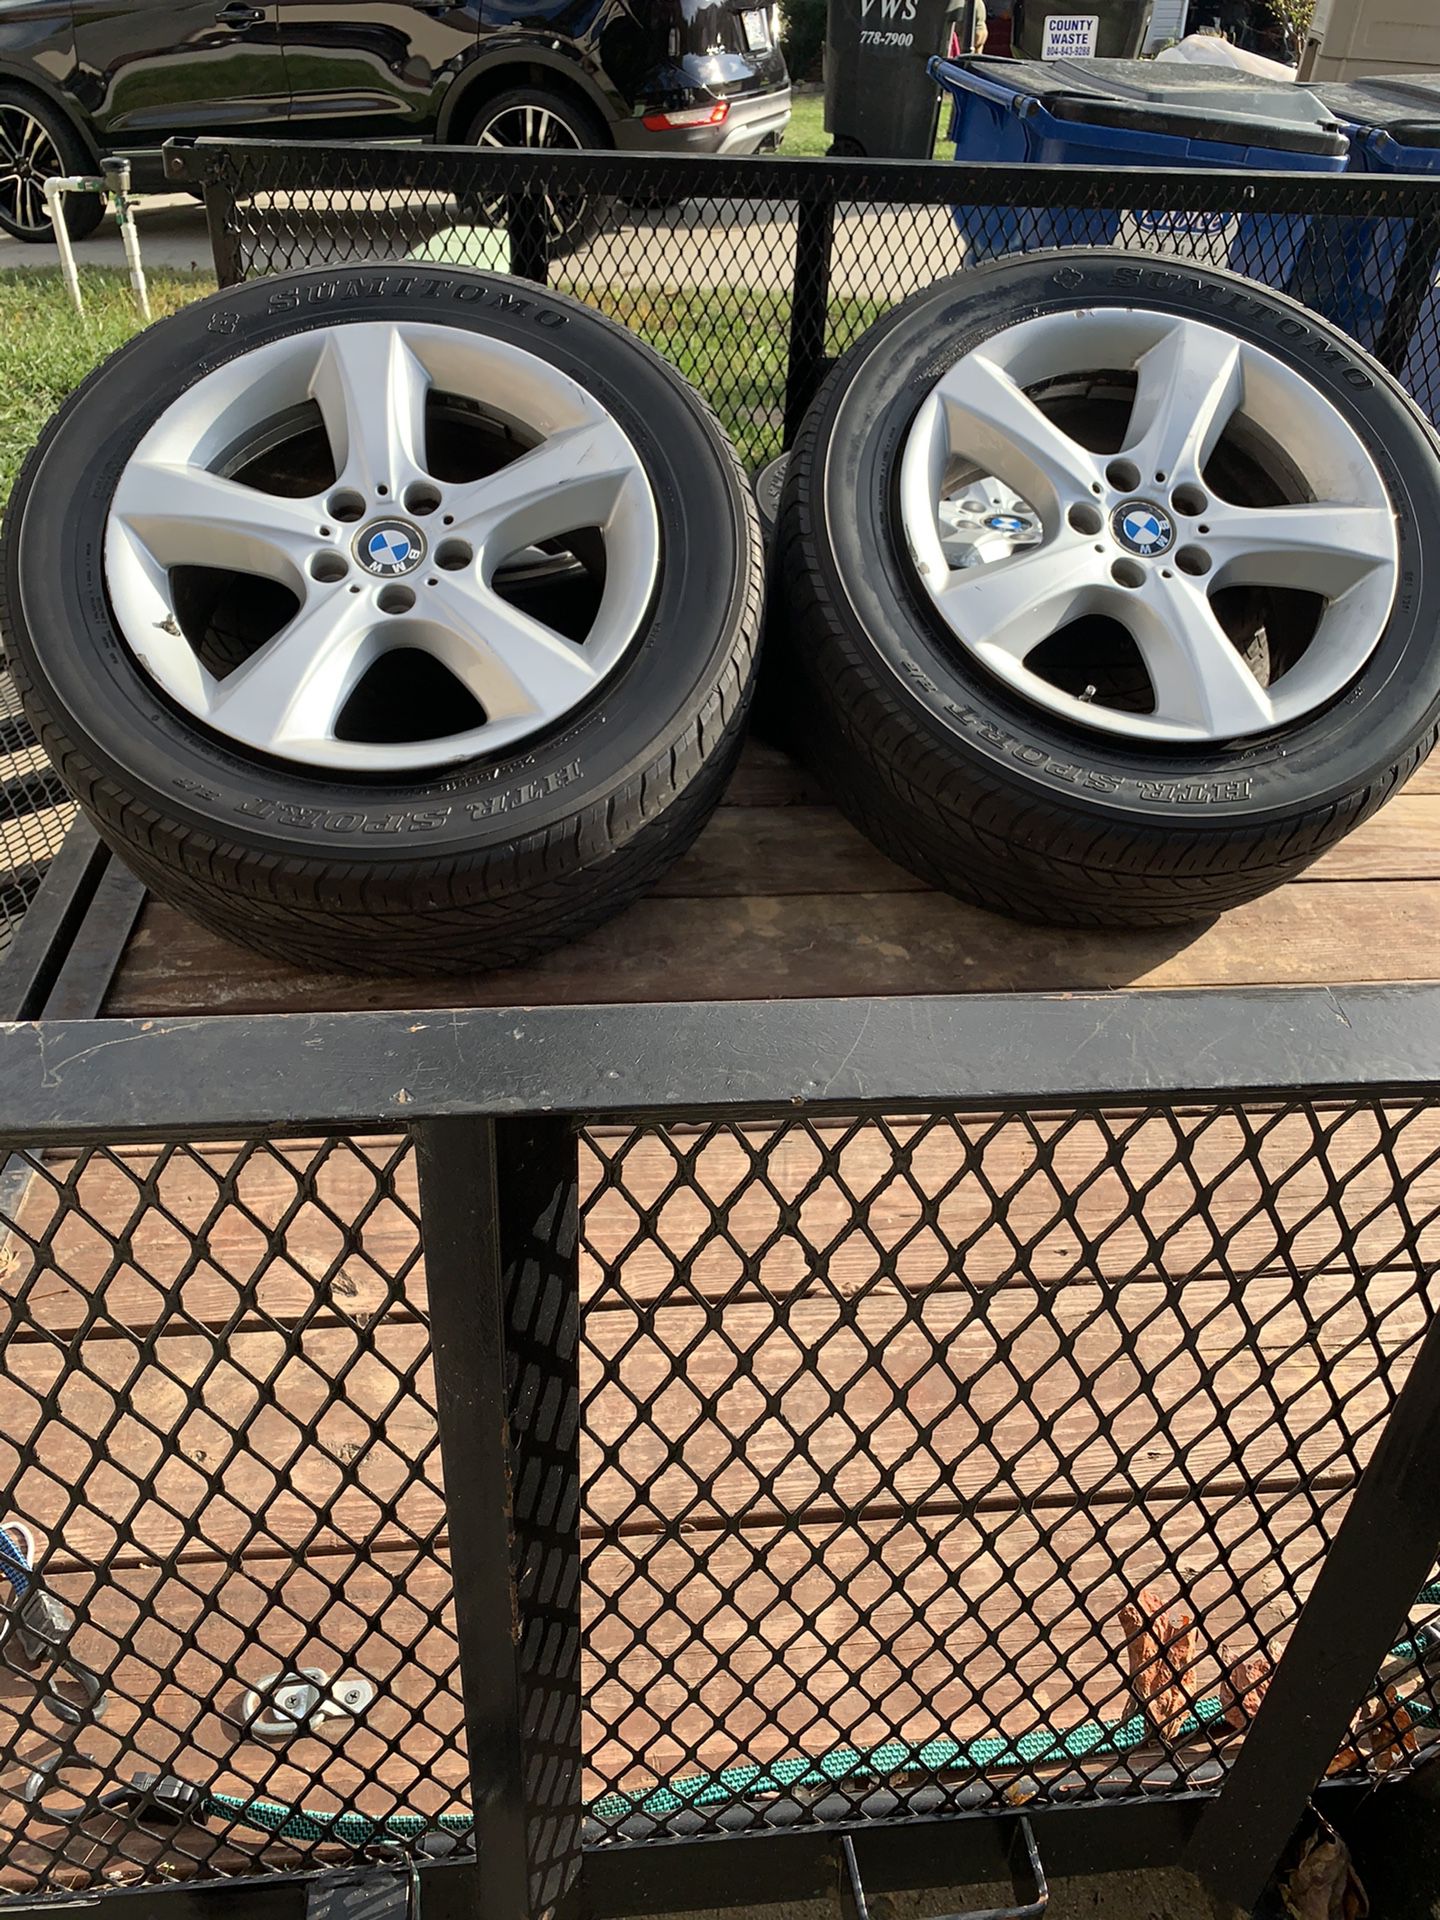 2007 BMW X5 tire and rims